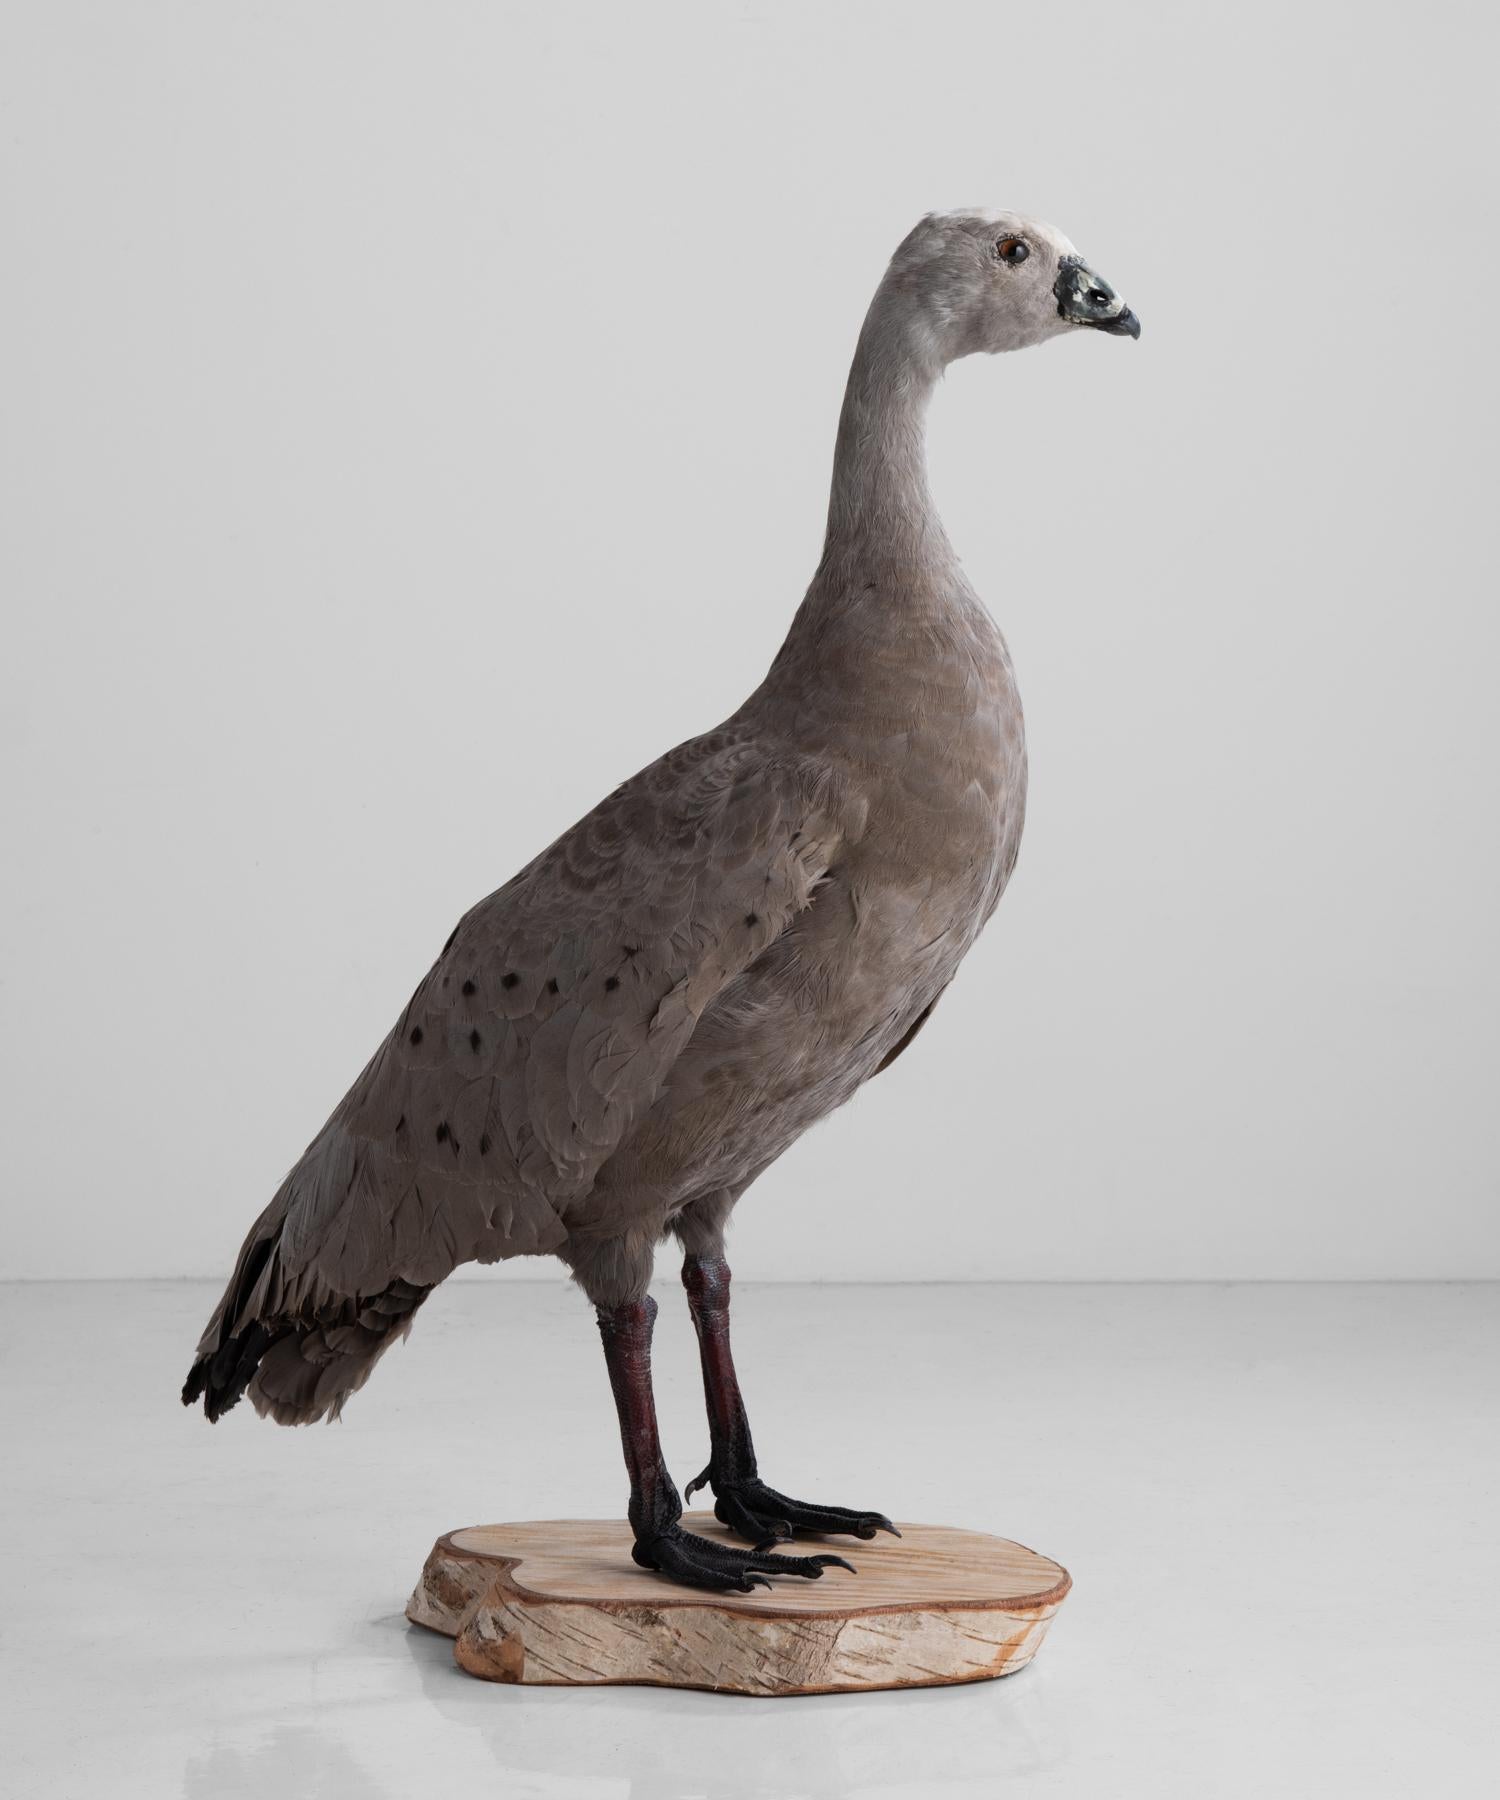 Cape barren goose taxidermy, circa 1950.

With beautiful grey plumage, mounted on decorative log base.